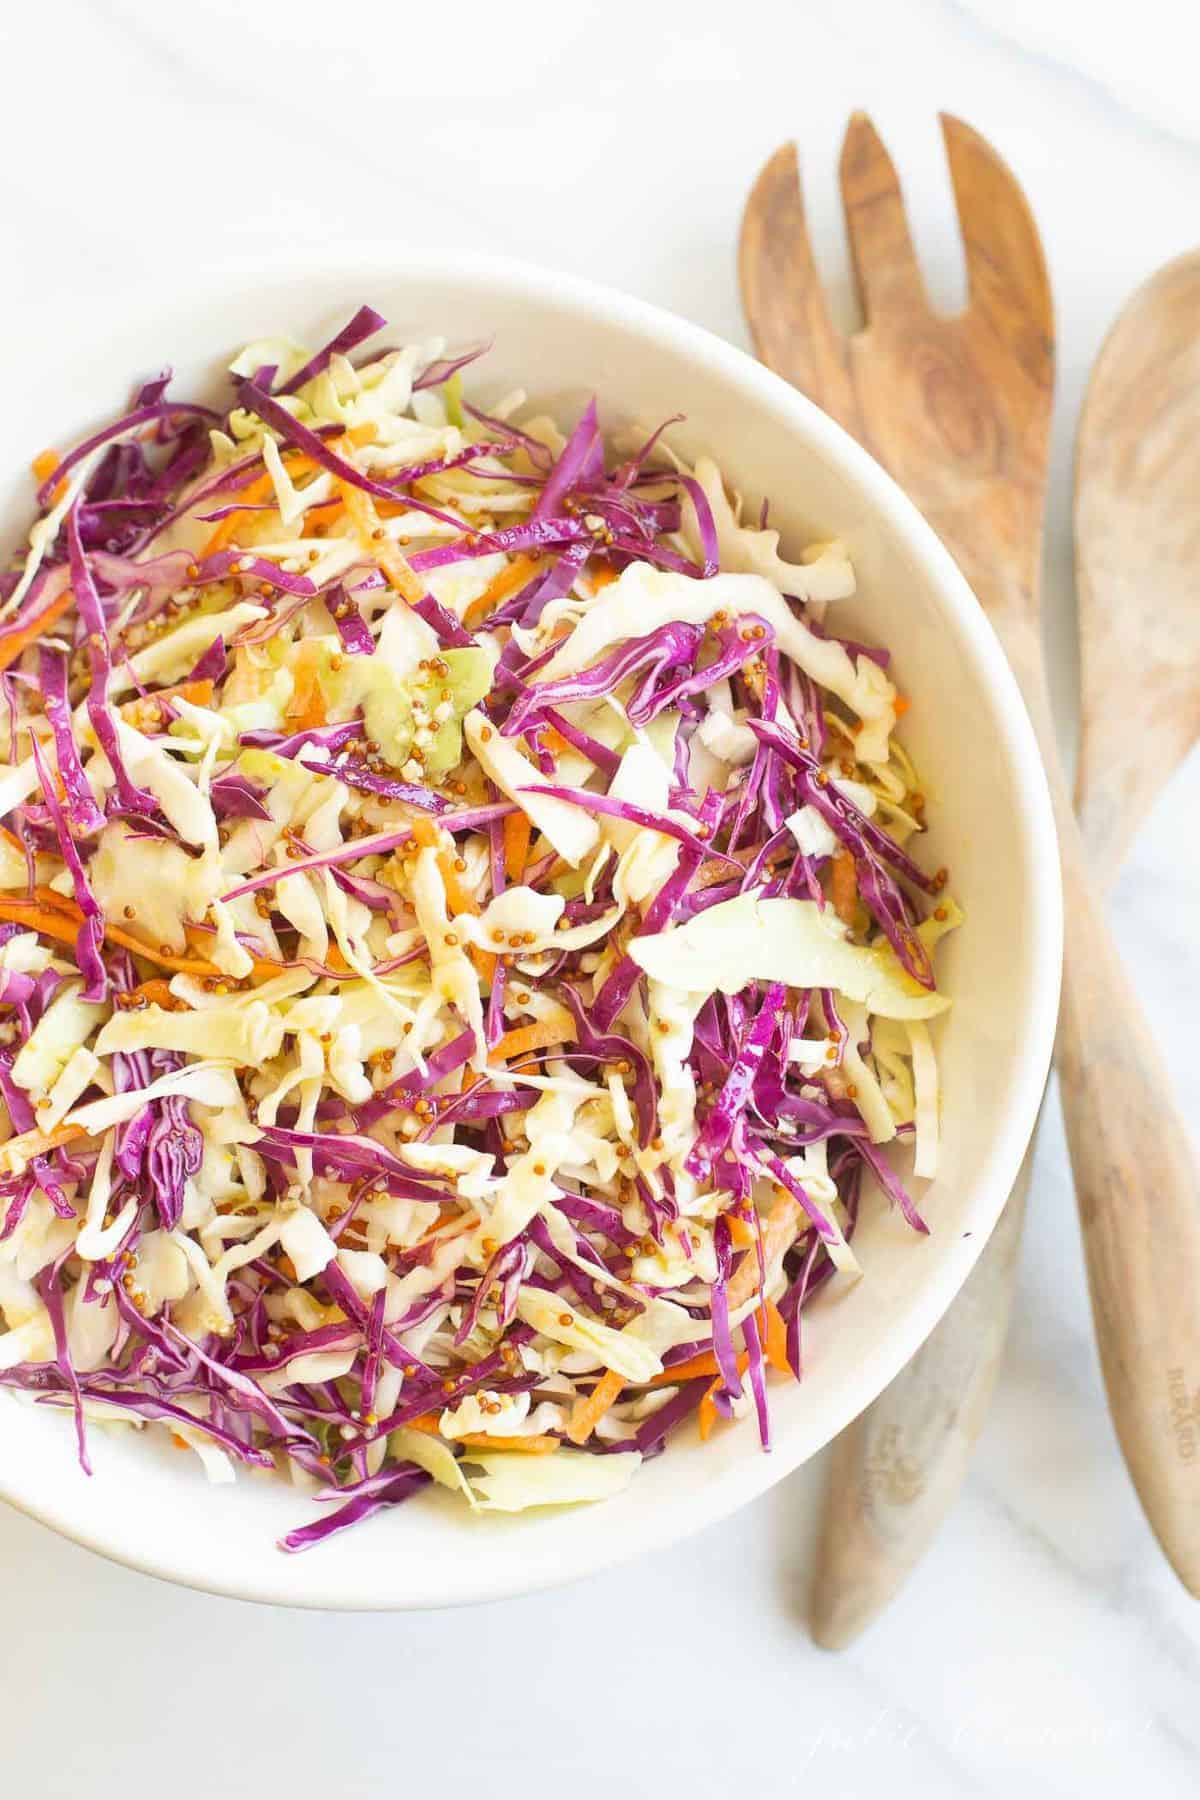 White salad bowl filled with colorful cabbage salad and wooden serving spoons. #cabbagesalad